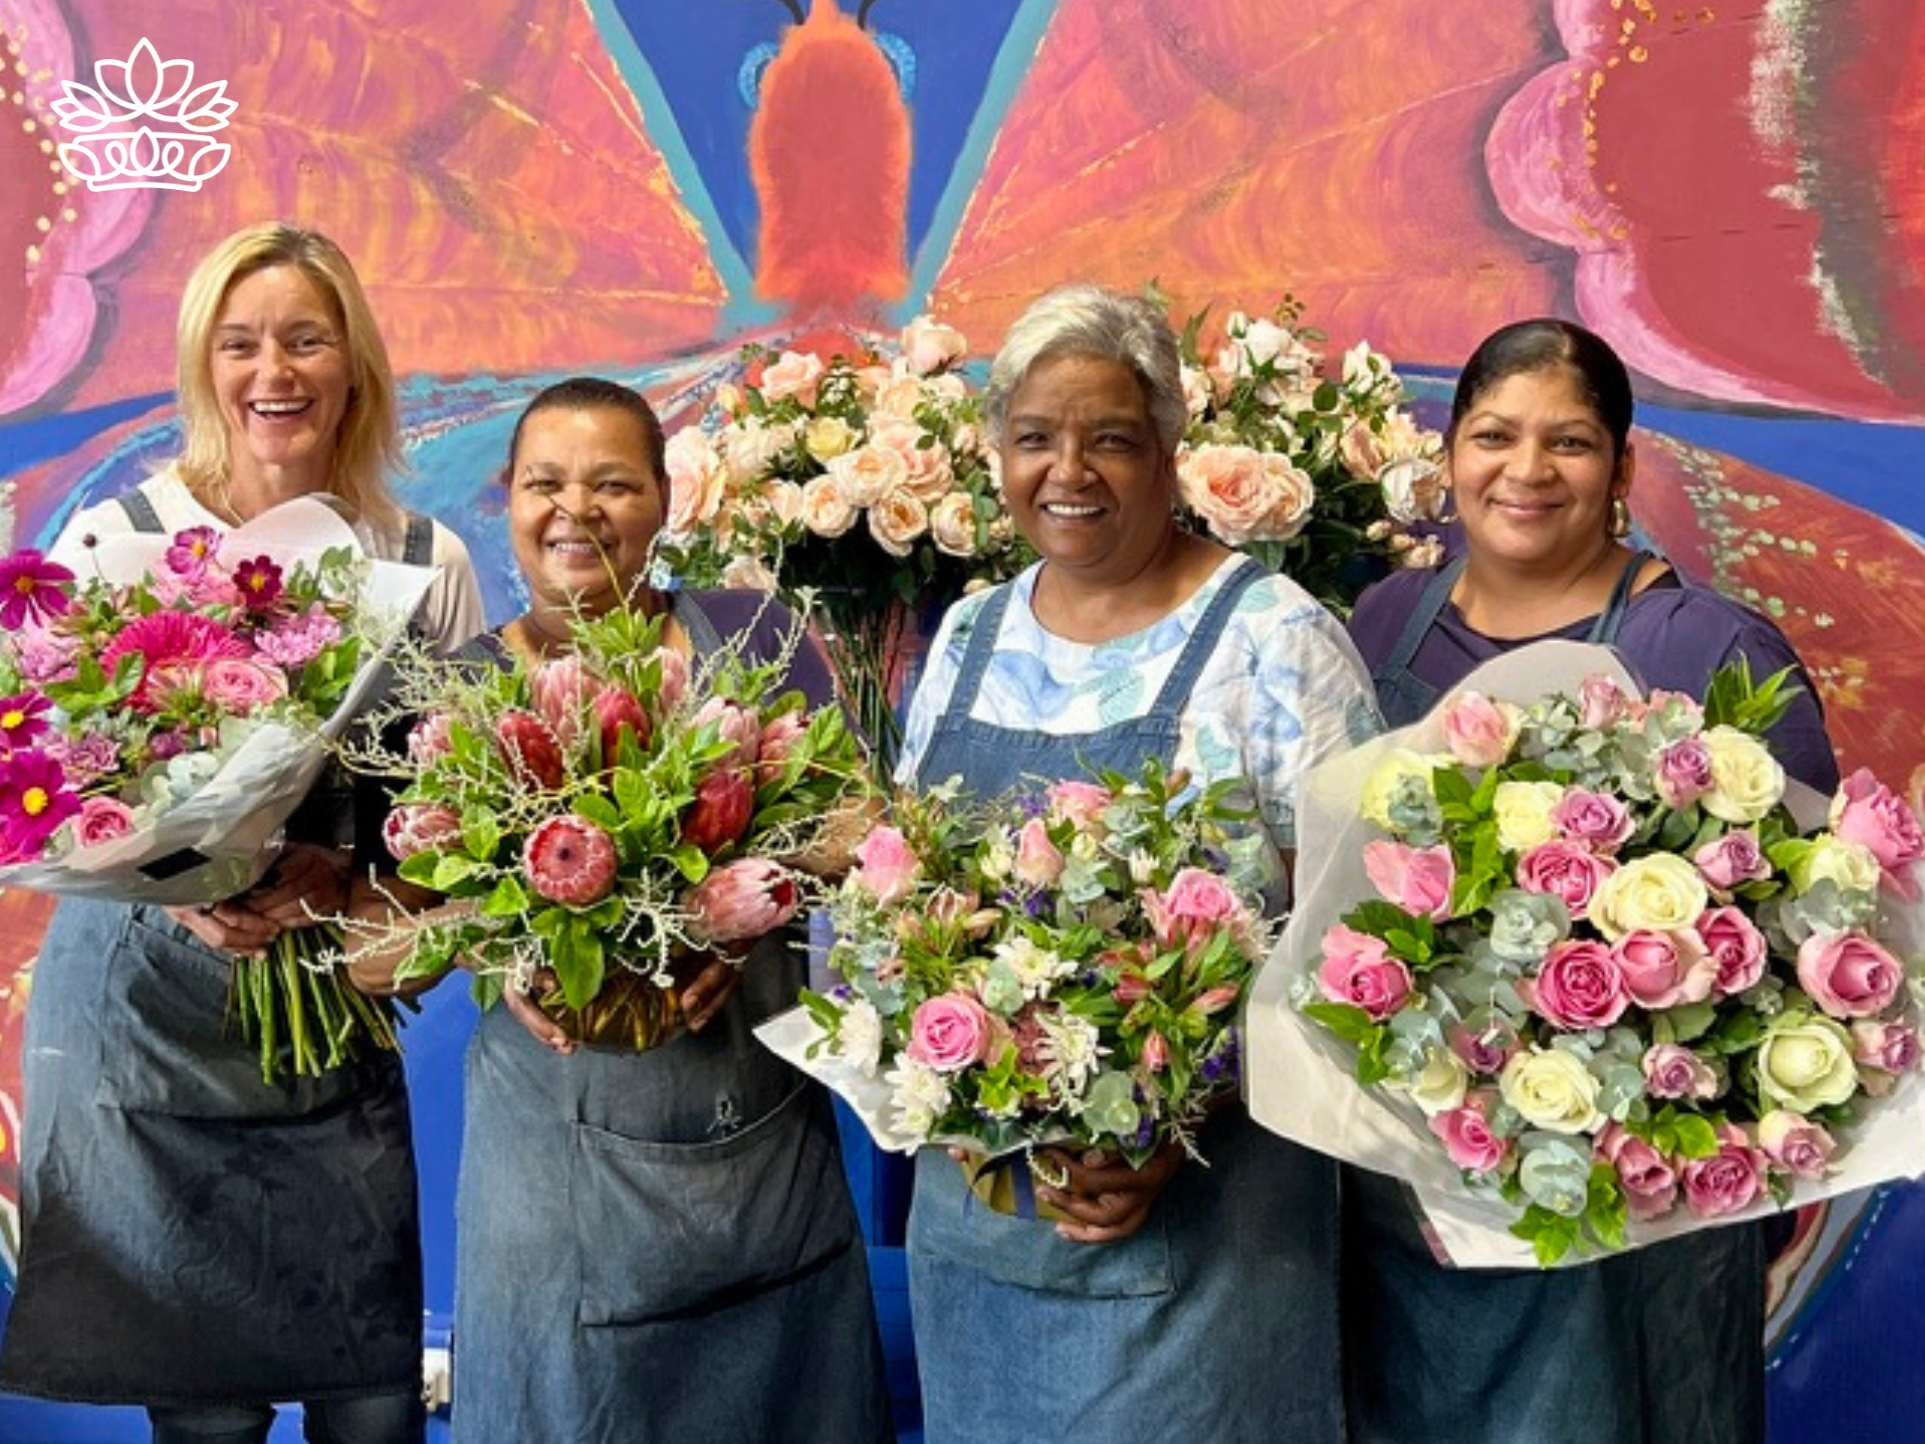 Four joyous florists presenting an array of splendid bouquets, bursting with fresh blooms in various hues, showcasing their floral artistry at Fabulous Flowers and Gifts.